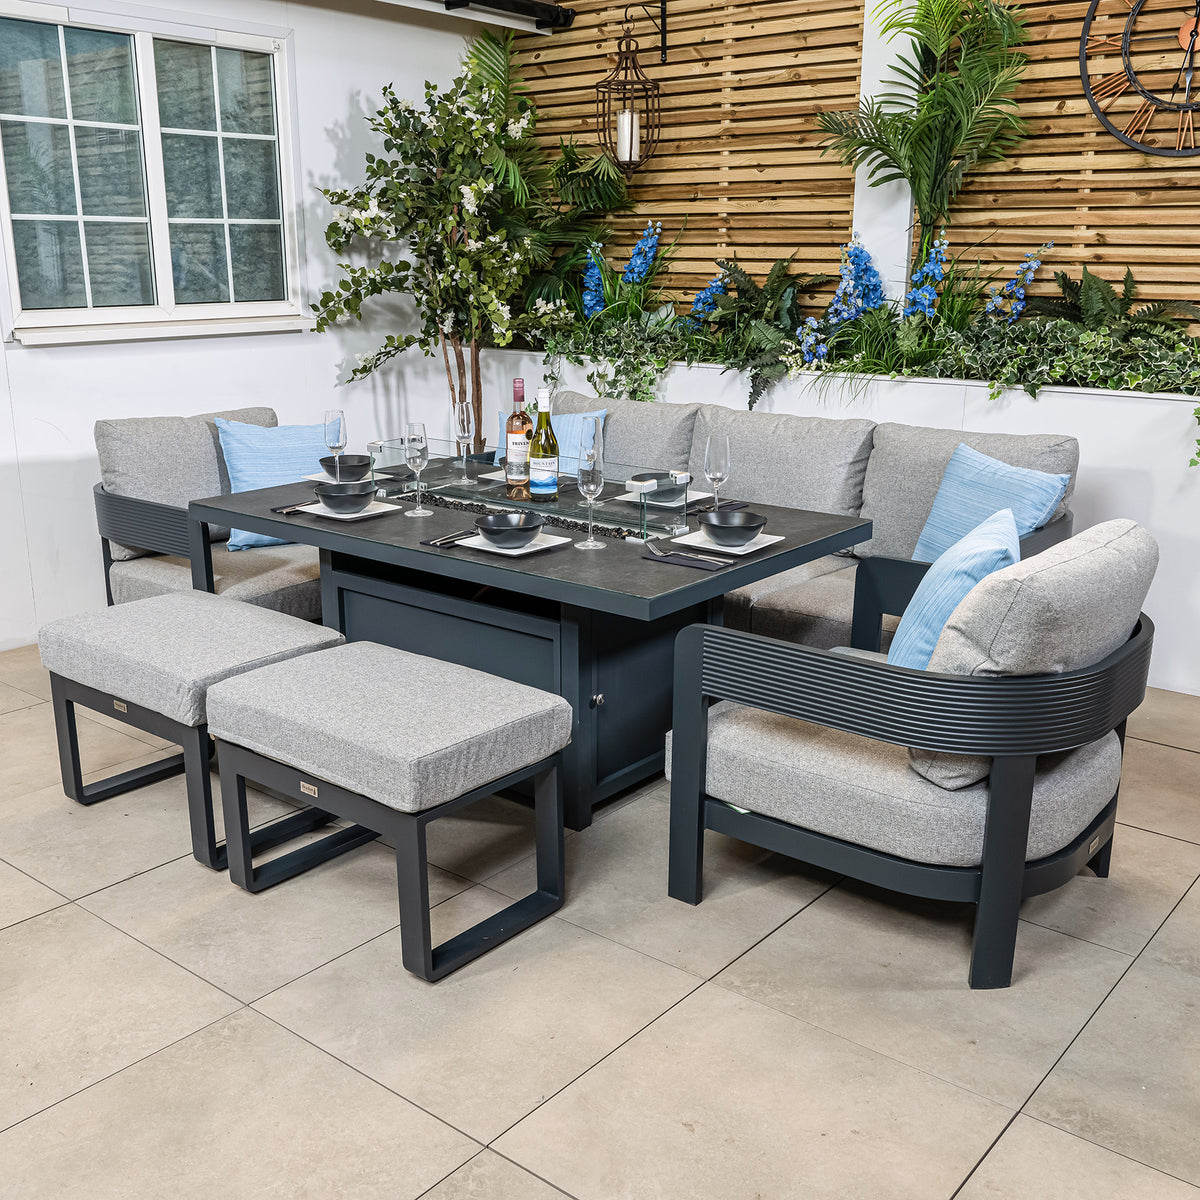 Bracken Outdoors Nevada Anthracite Ripple Aluminium Lounge Sofa Set with Fire Pit Table